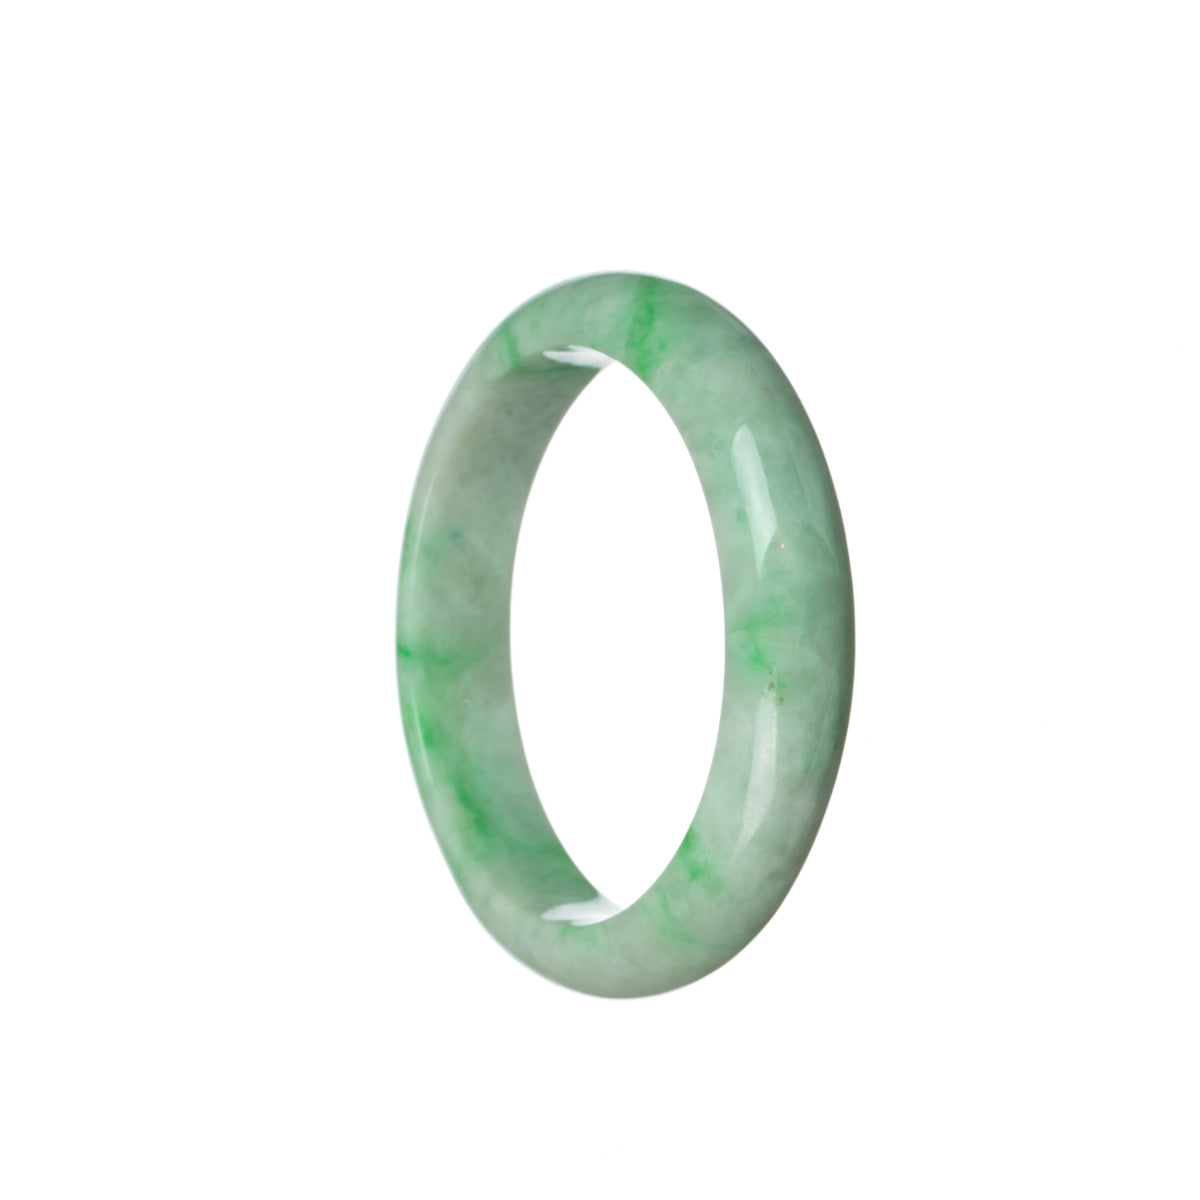 A close-up image of an untreated white jade bangle with apple green accents. The bangle has a half-moon shape and measures 53mm in diameter. The jadeite jade is of high quality and is authentically sourced.